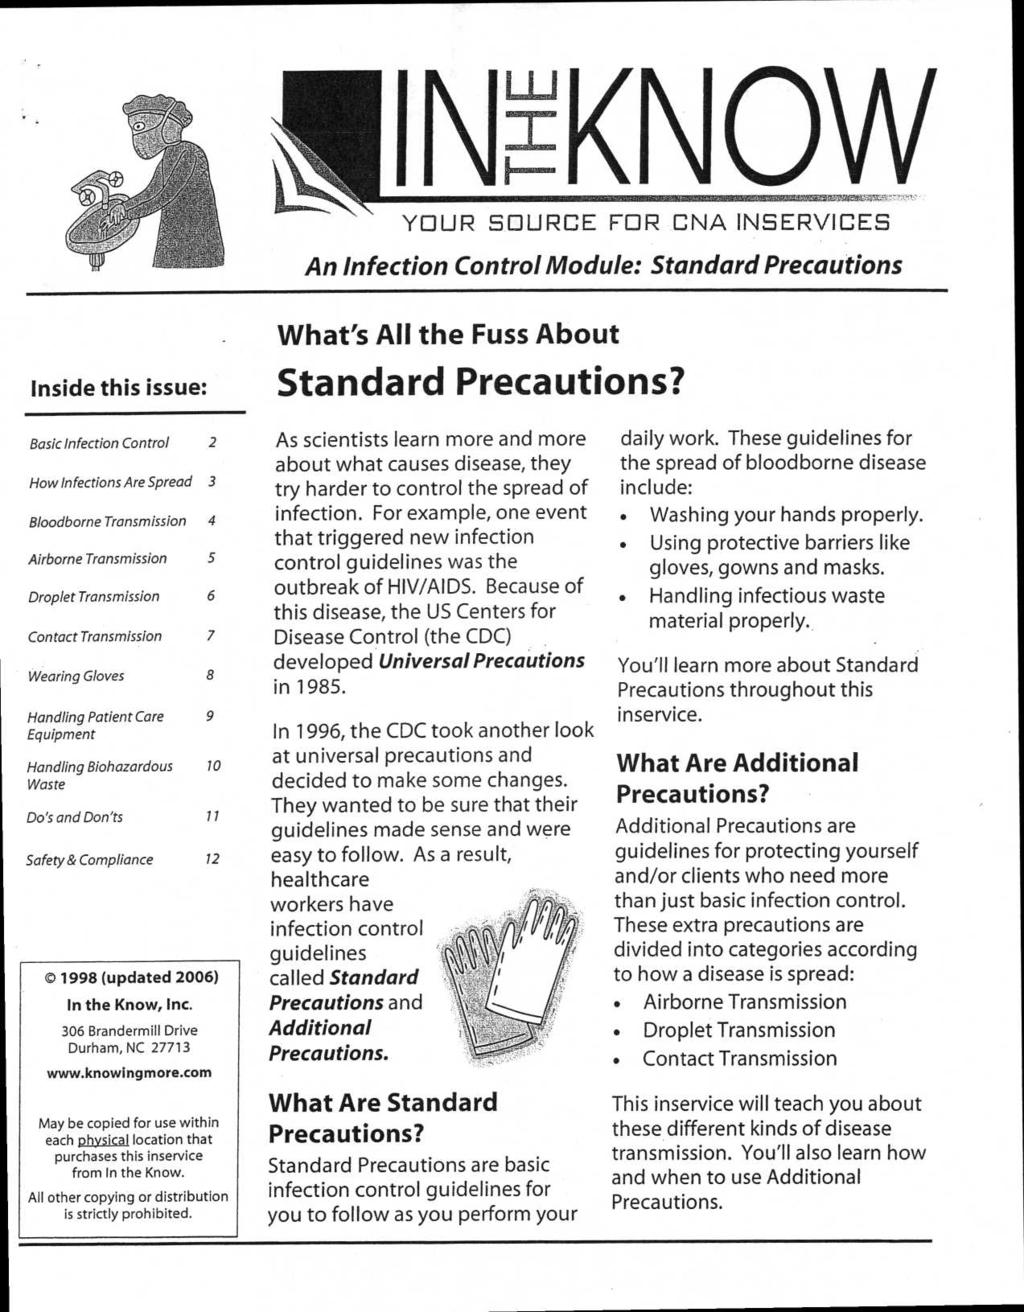 IITKNOW YOUR SOURCE FOR CNA INSERVICES An Infection Control Module: Standard Precautions Inside this issue: What's All the Fuss About Standard Precautions?